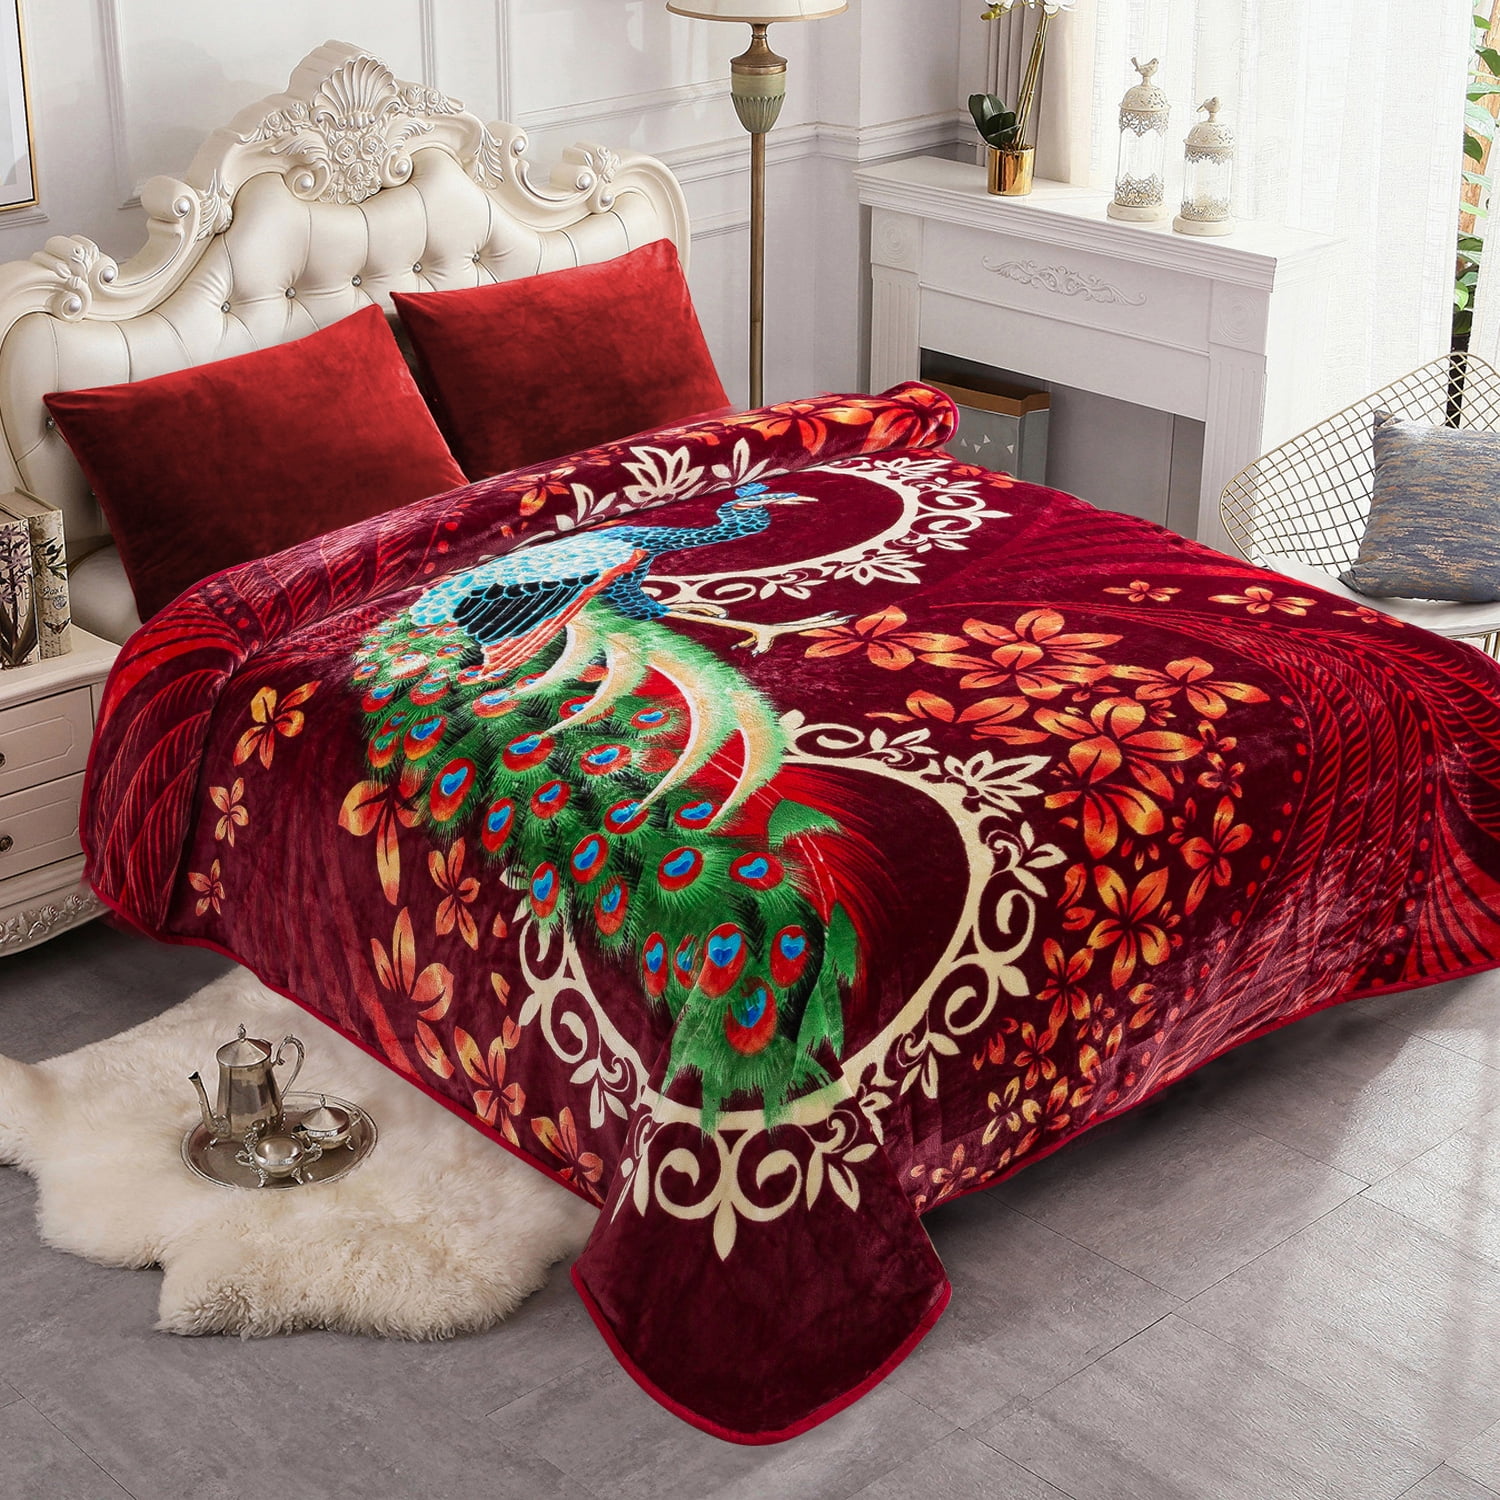 Organic Cotton Red Bear Comforter and Floral Blanket